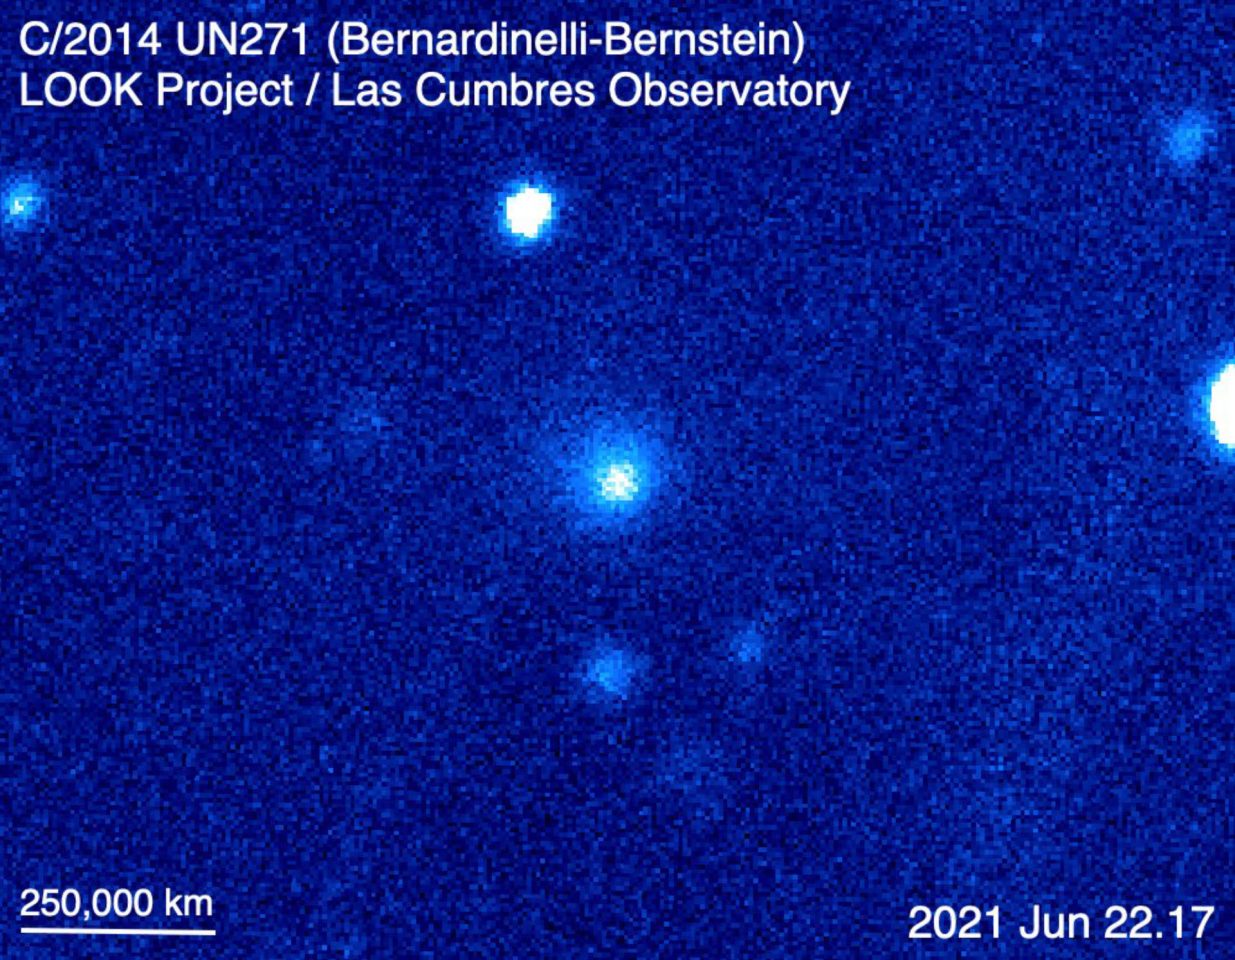 Comet C/2014 UN271 Bernardinelli-Bernstein (center), with the coma visible as a fuzzy cloud around the bright spot, in contrast with stars such as the one at the top, which have a crisp outline